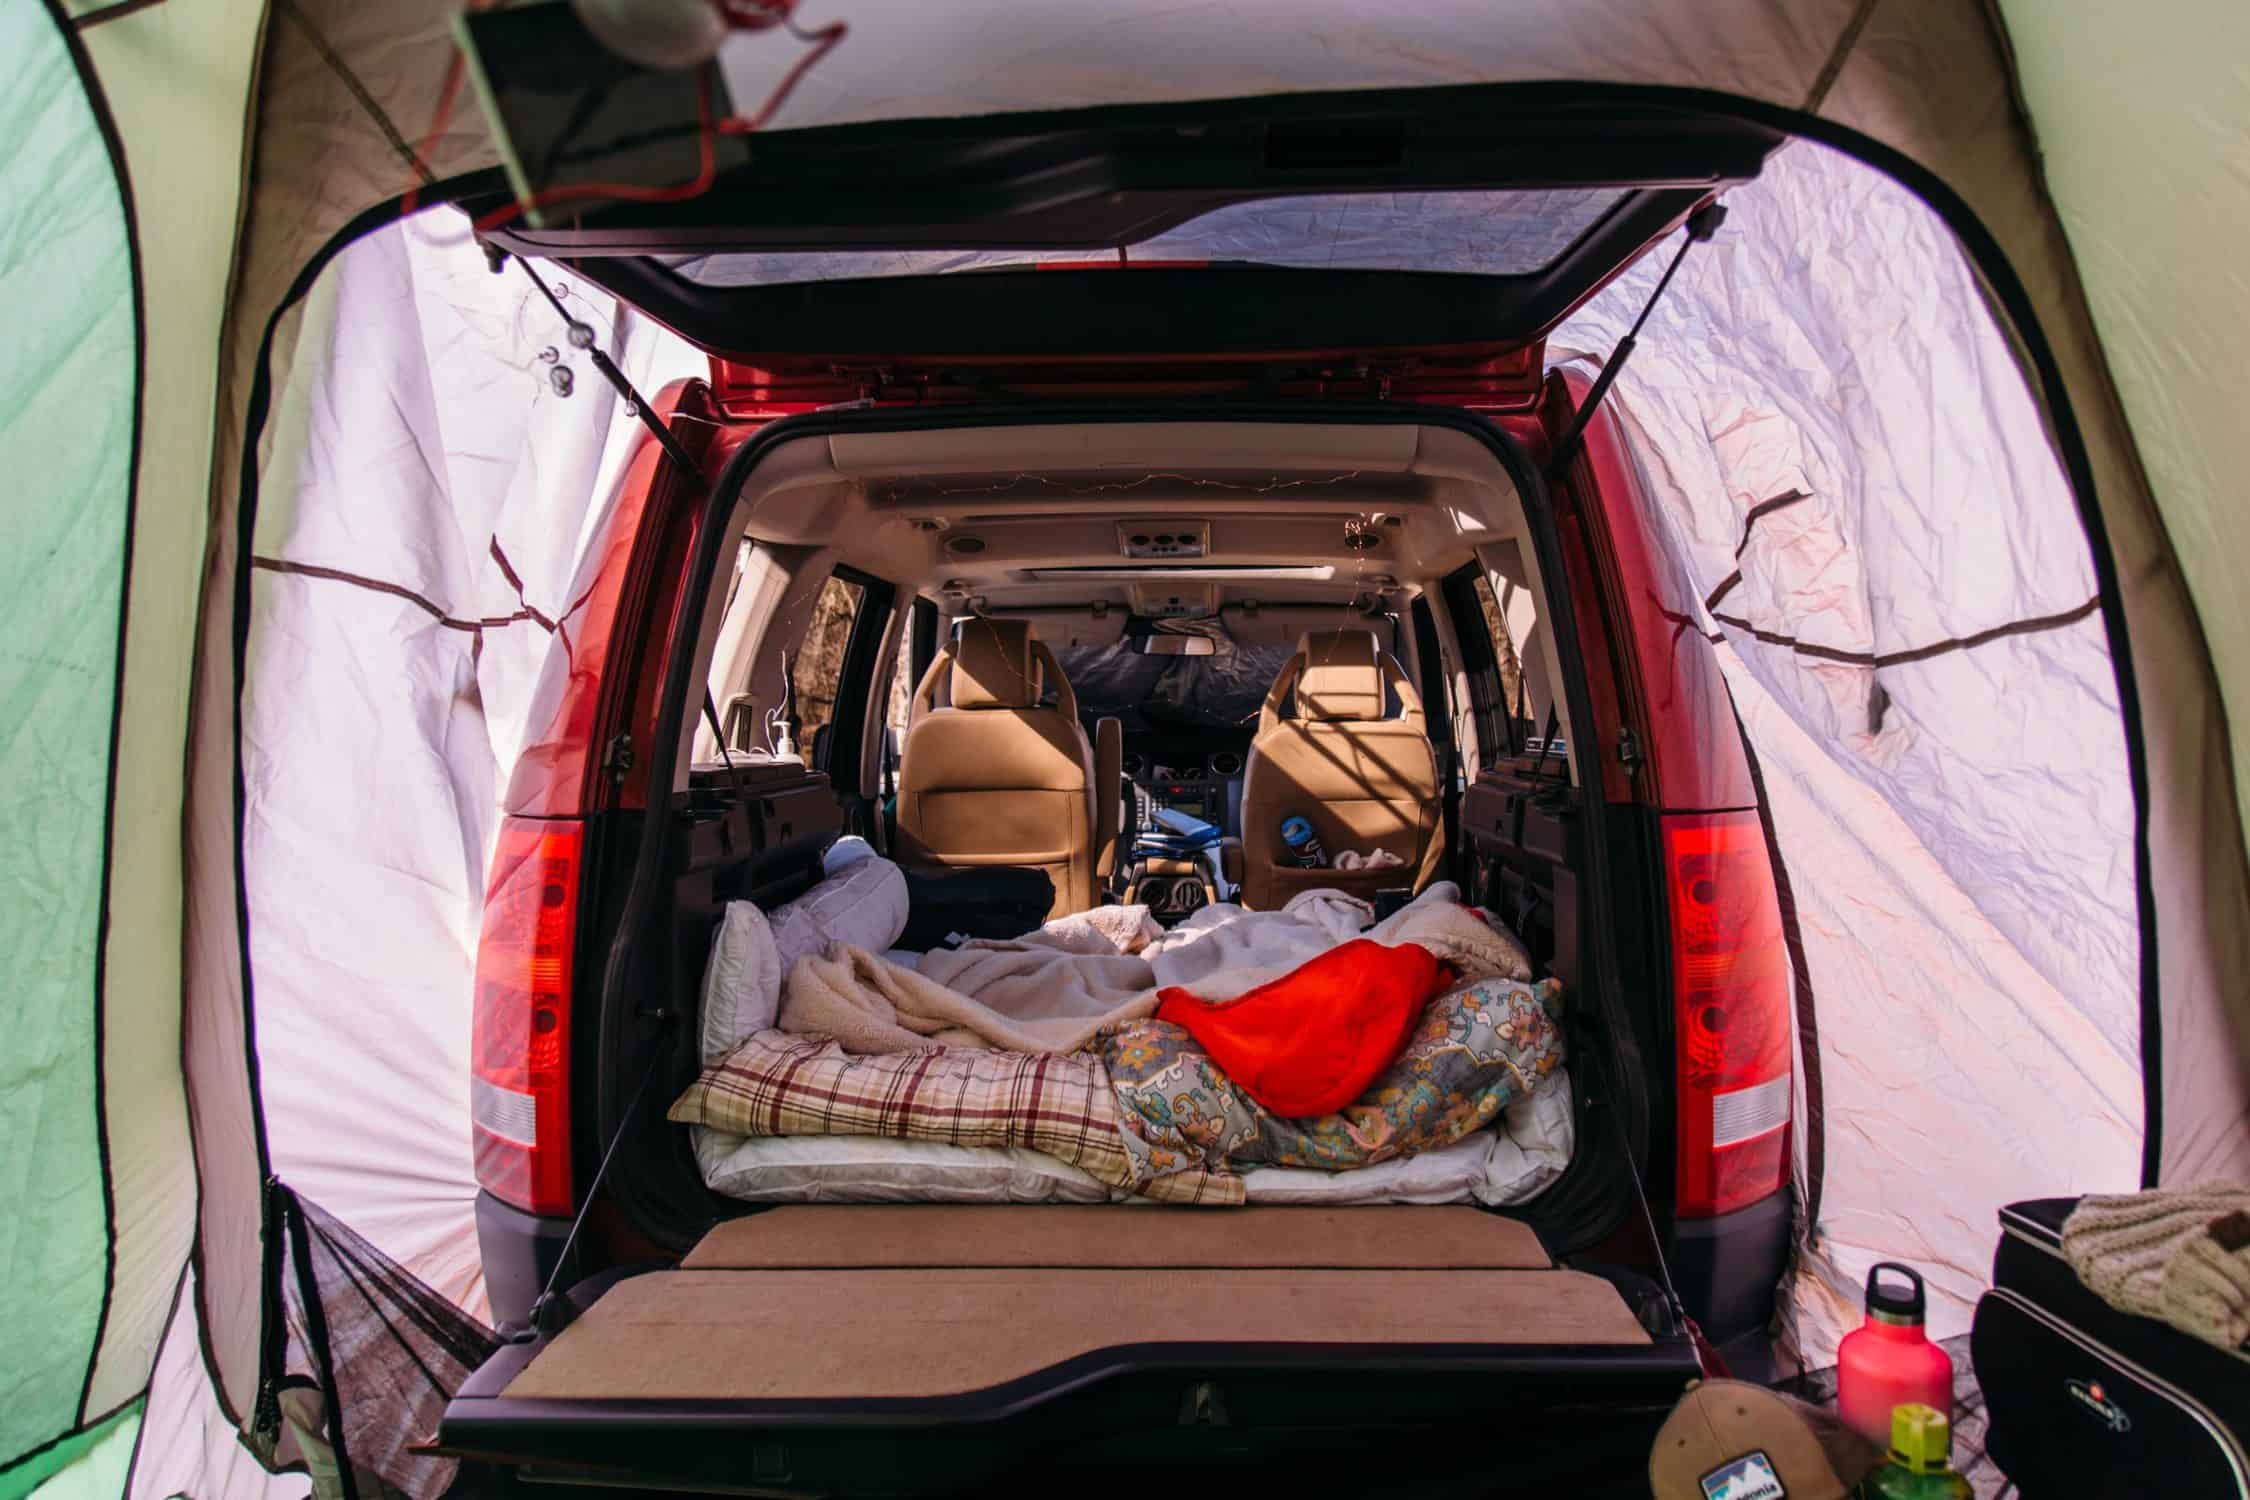 How to Stay Warm Sleeping in the Car During Winter - The Geeky Camper